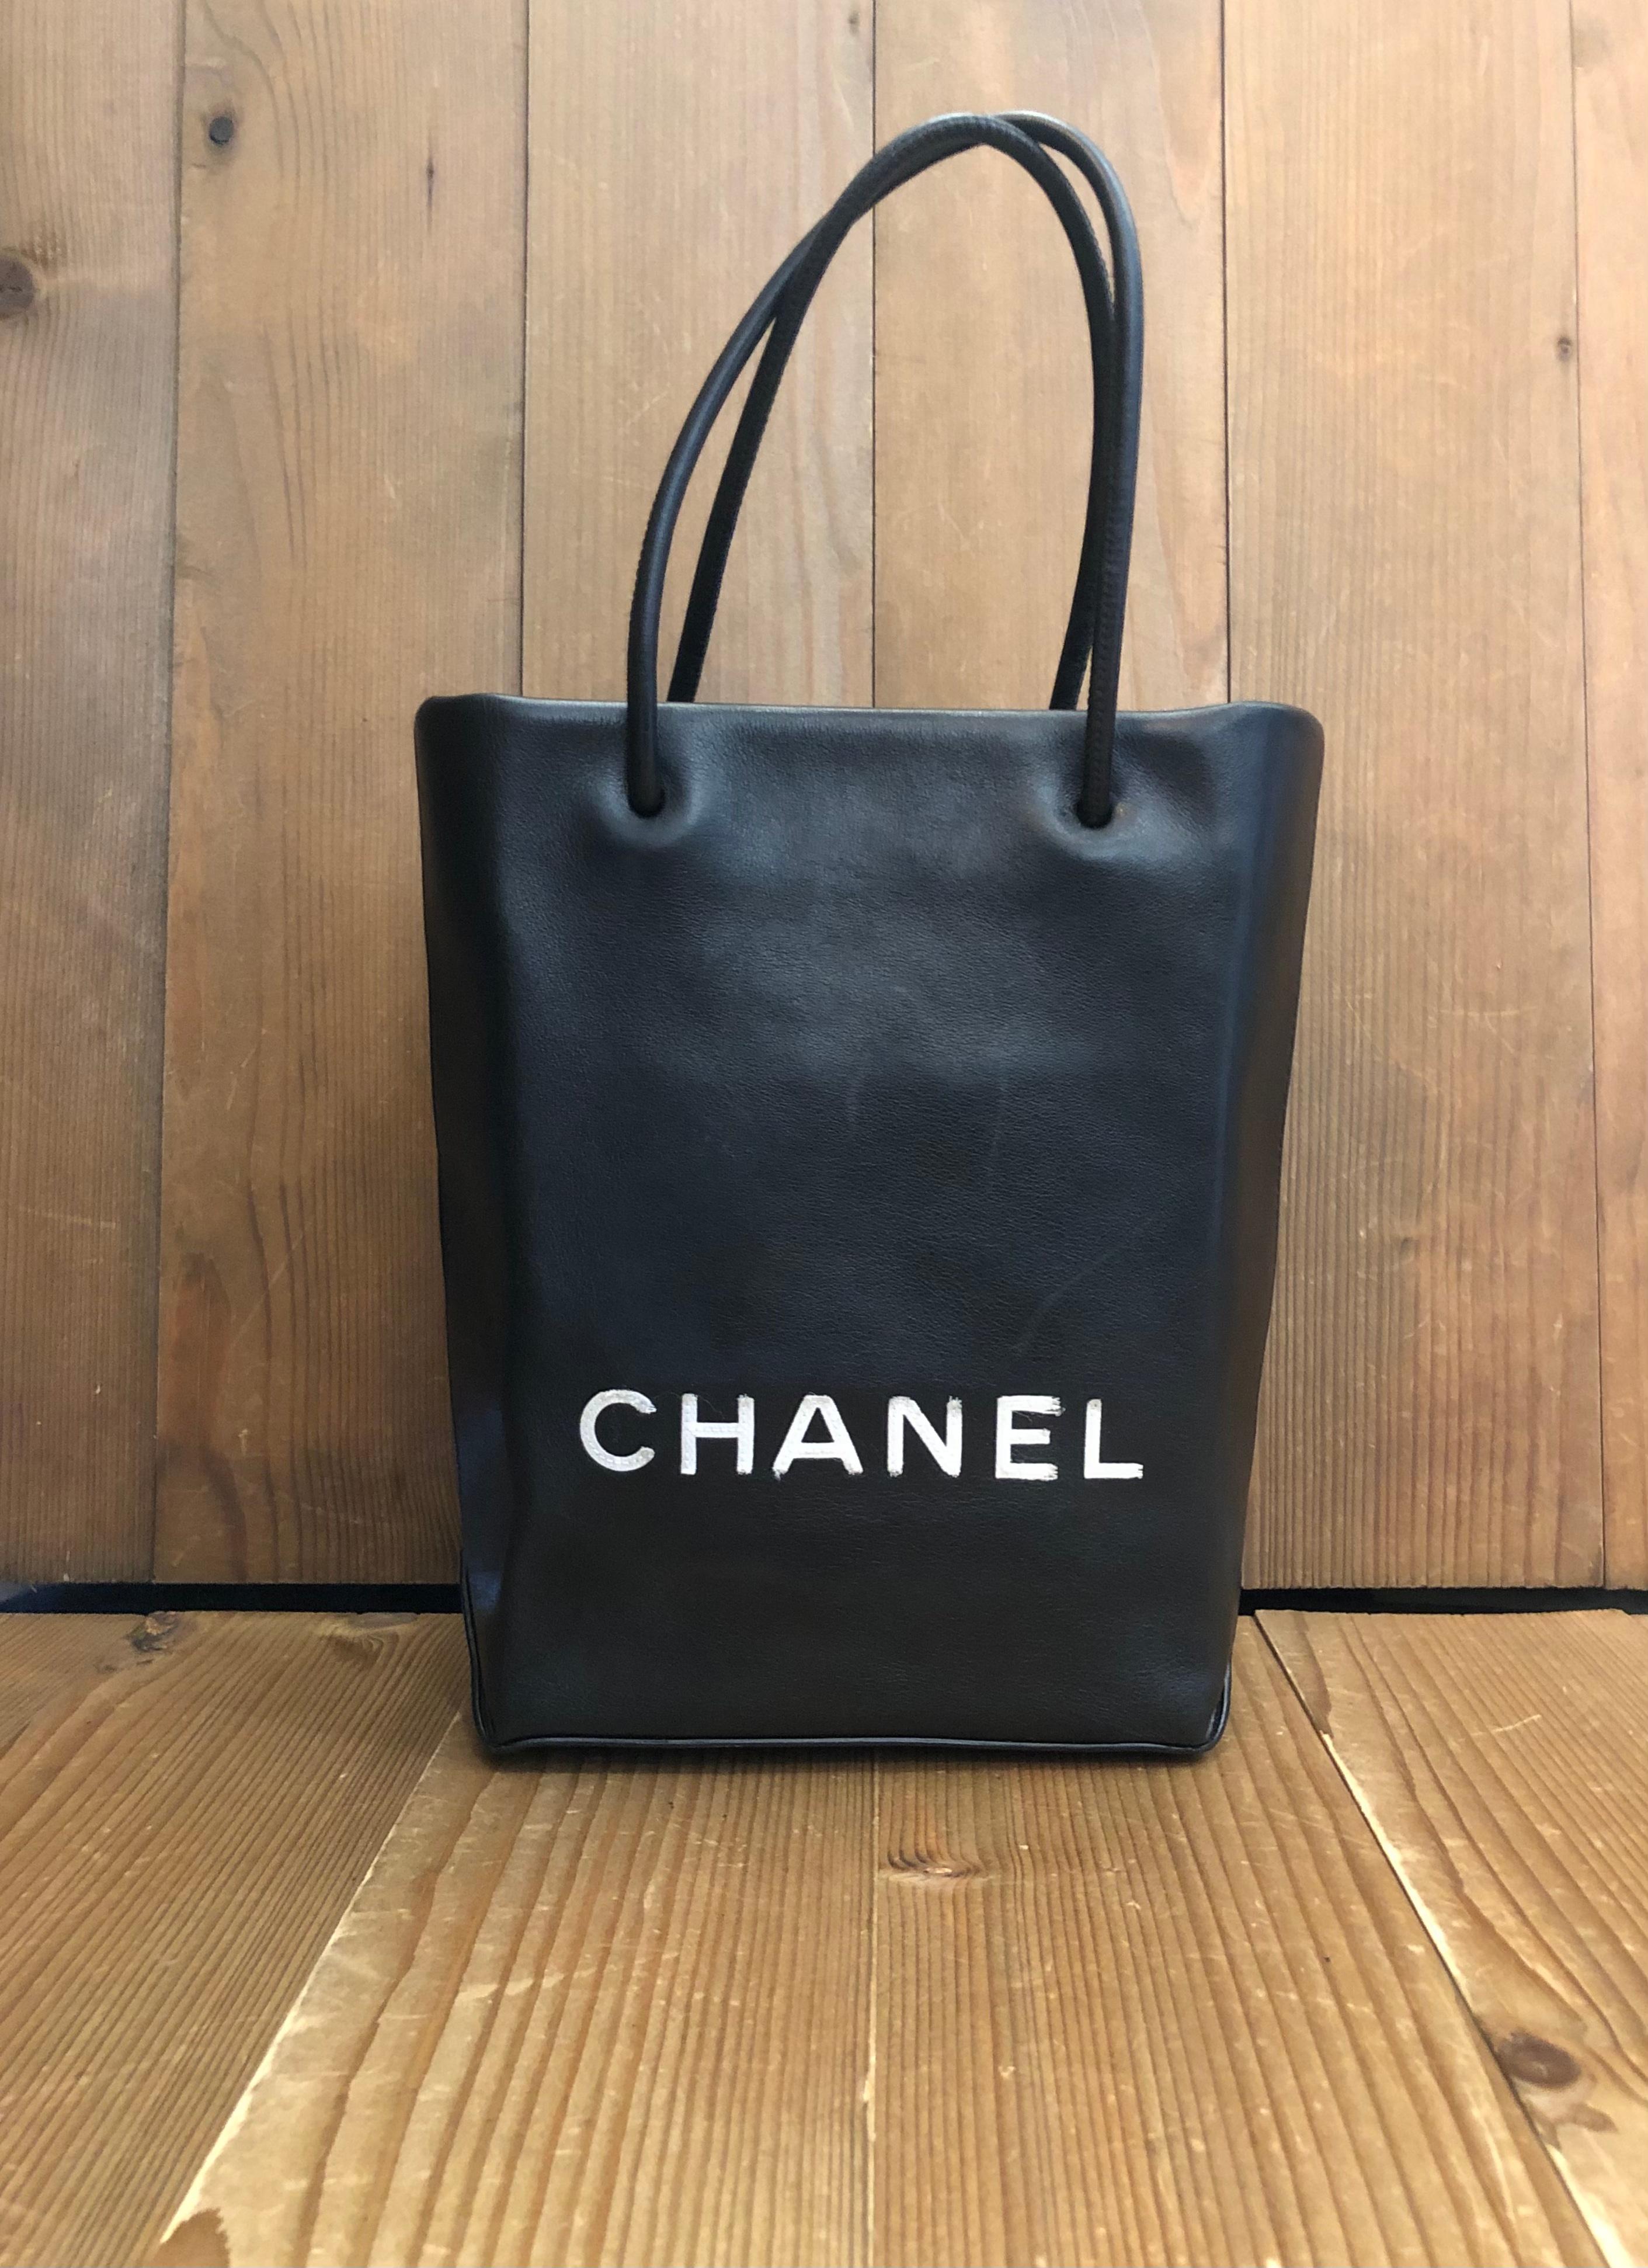 This stylish Chanel mini shopper tote bag is crafted of calfskin leather in black with letters CHANEL in white fabric sewn on the front. Karl Lagerfeld once admitted to collecting chic paper bags which made him decide to immortalize the iconic paper